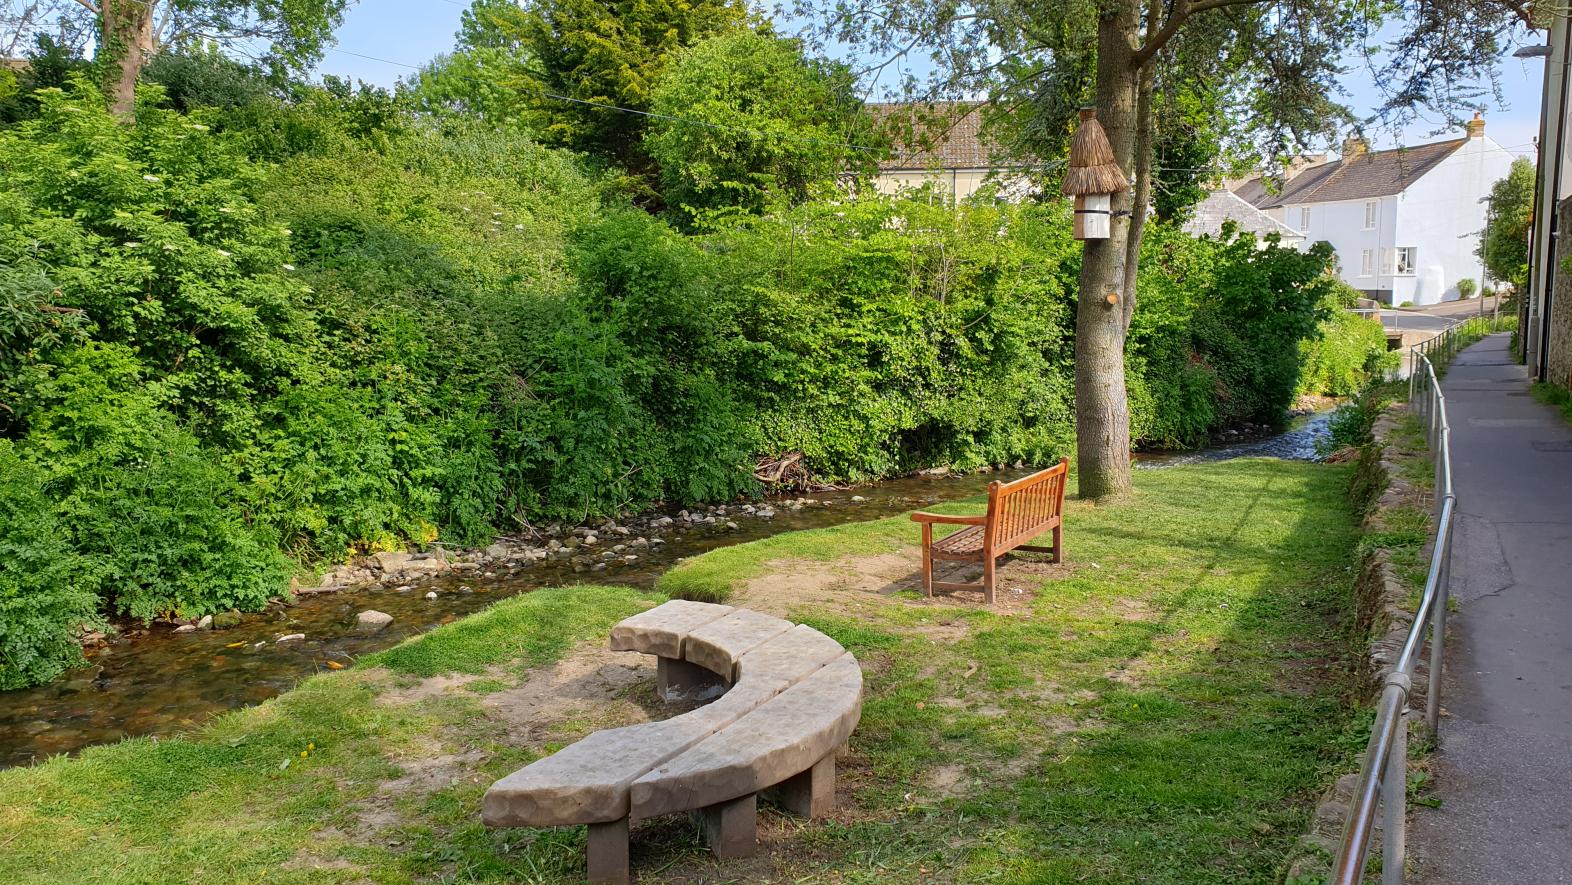 Benches along the River Lym path